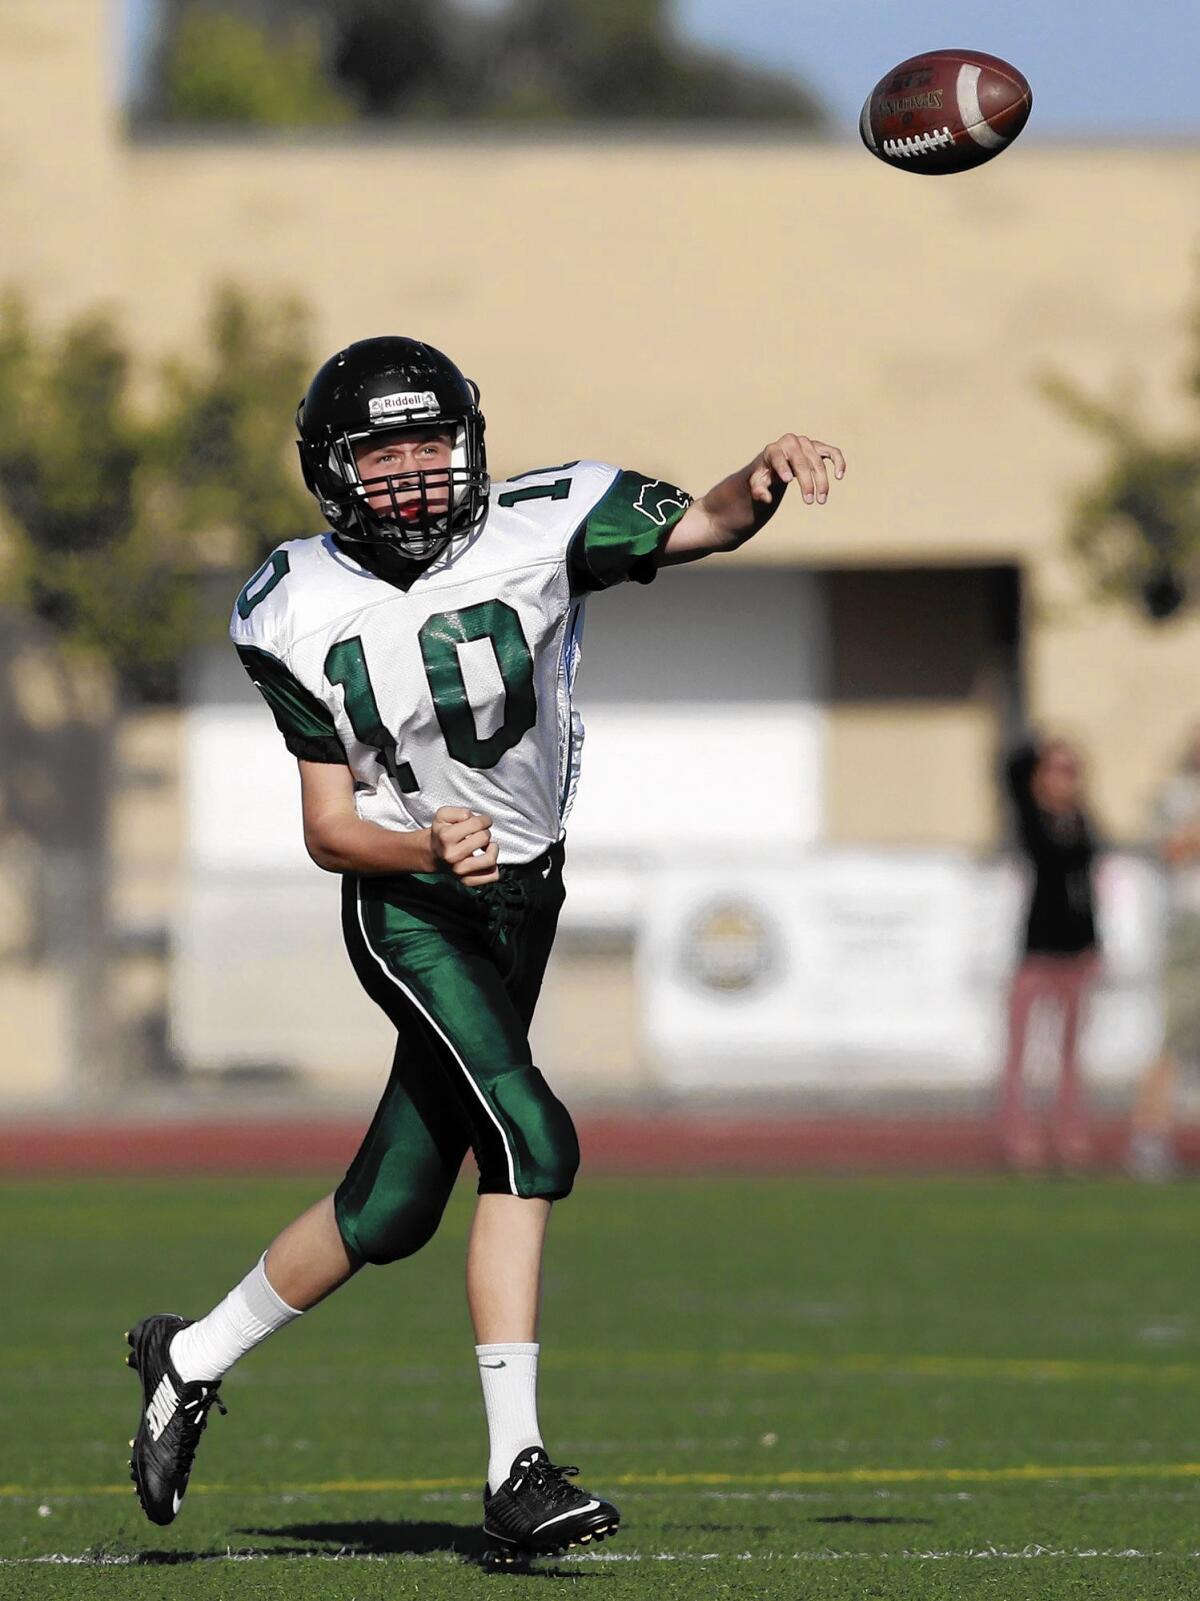 COSTA MESA, CA, October 16, 2014 -- Costa Mesa High quarterback Ben Swanson completes a pass during the second half against Estancia in a freshman Battle for the Bell game on Thursday. (Kevin Chang/ Daily Pilot)